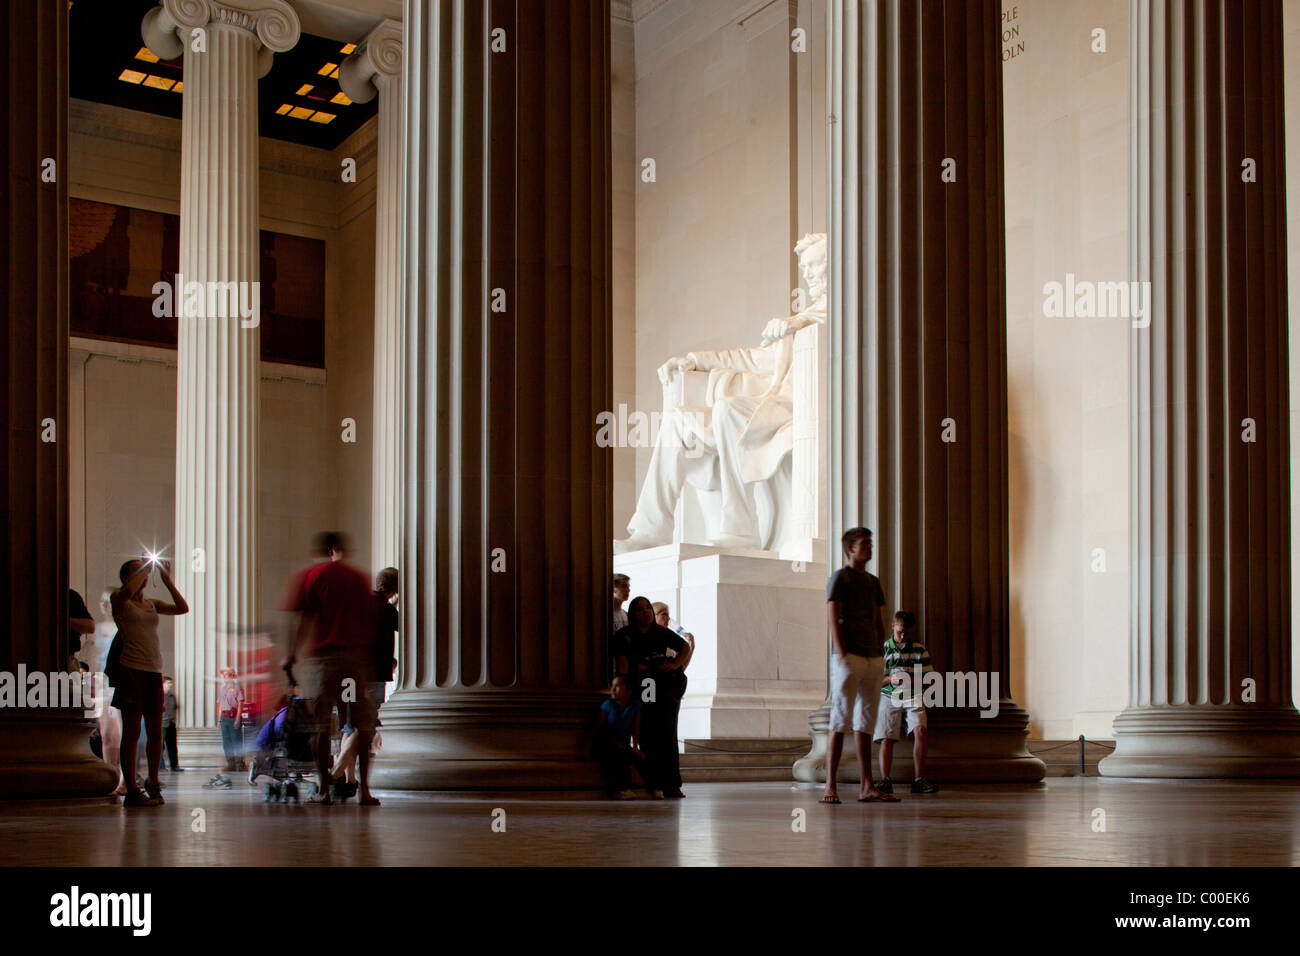 USA, District of Columbia, Washington, DC, Tourists visit shadowy interior of Lincoln Memorial on summer evening Stock Photo